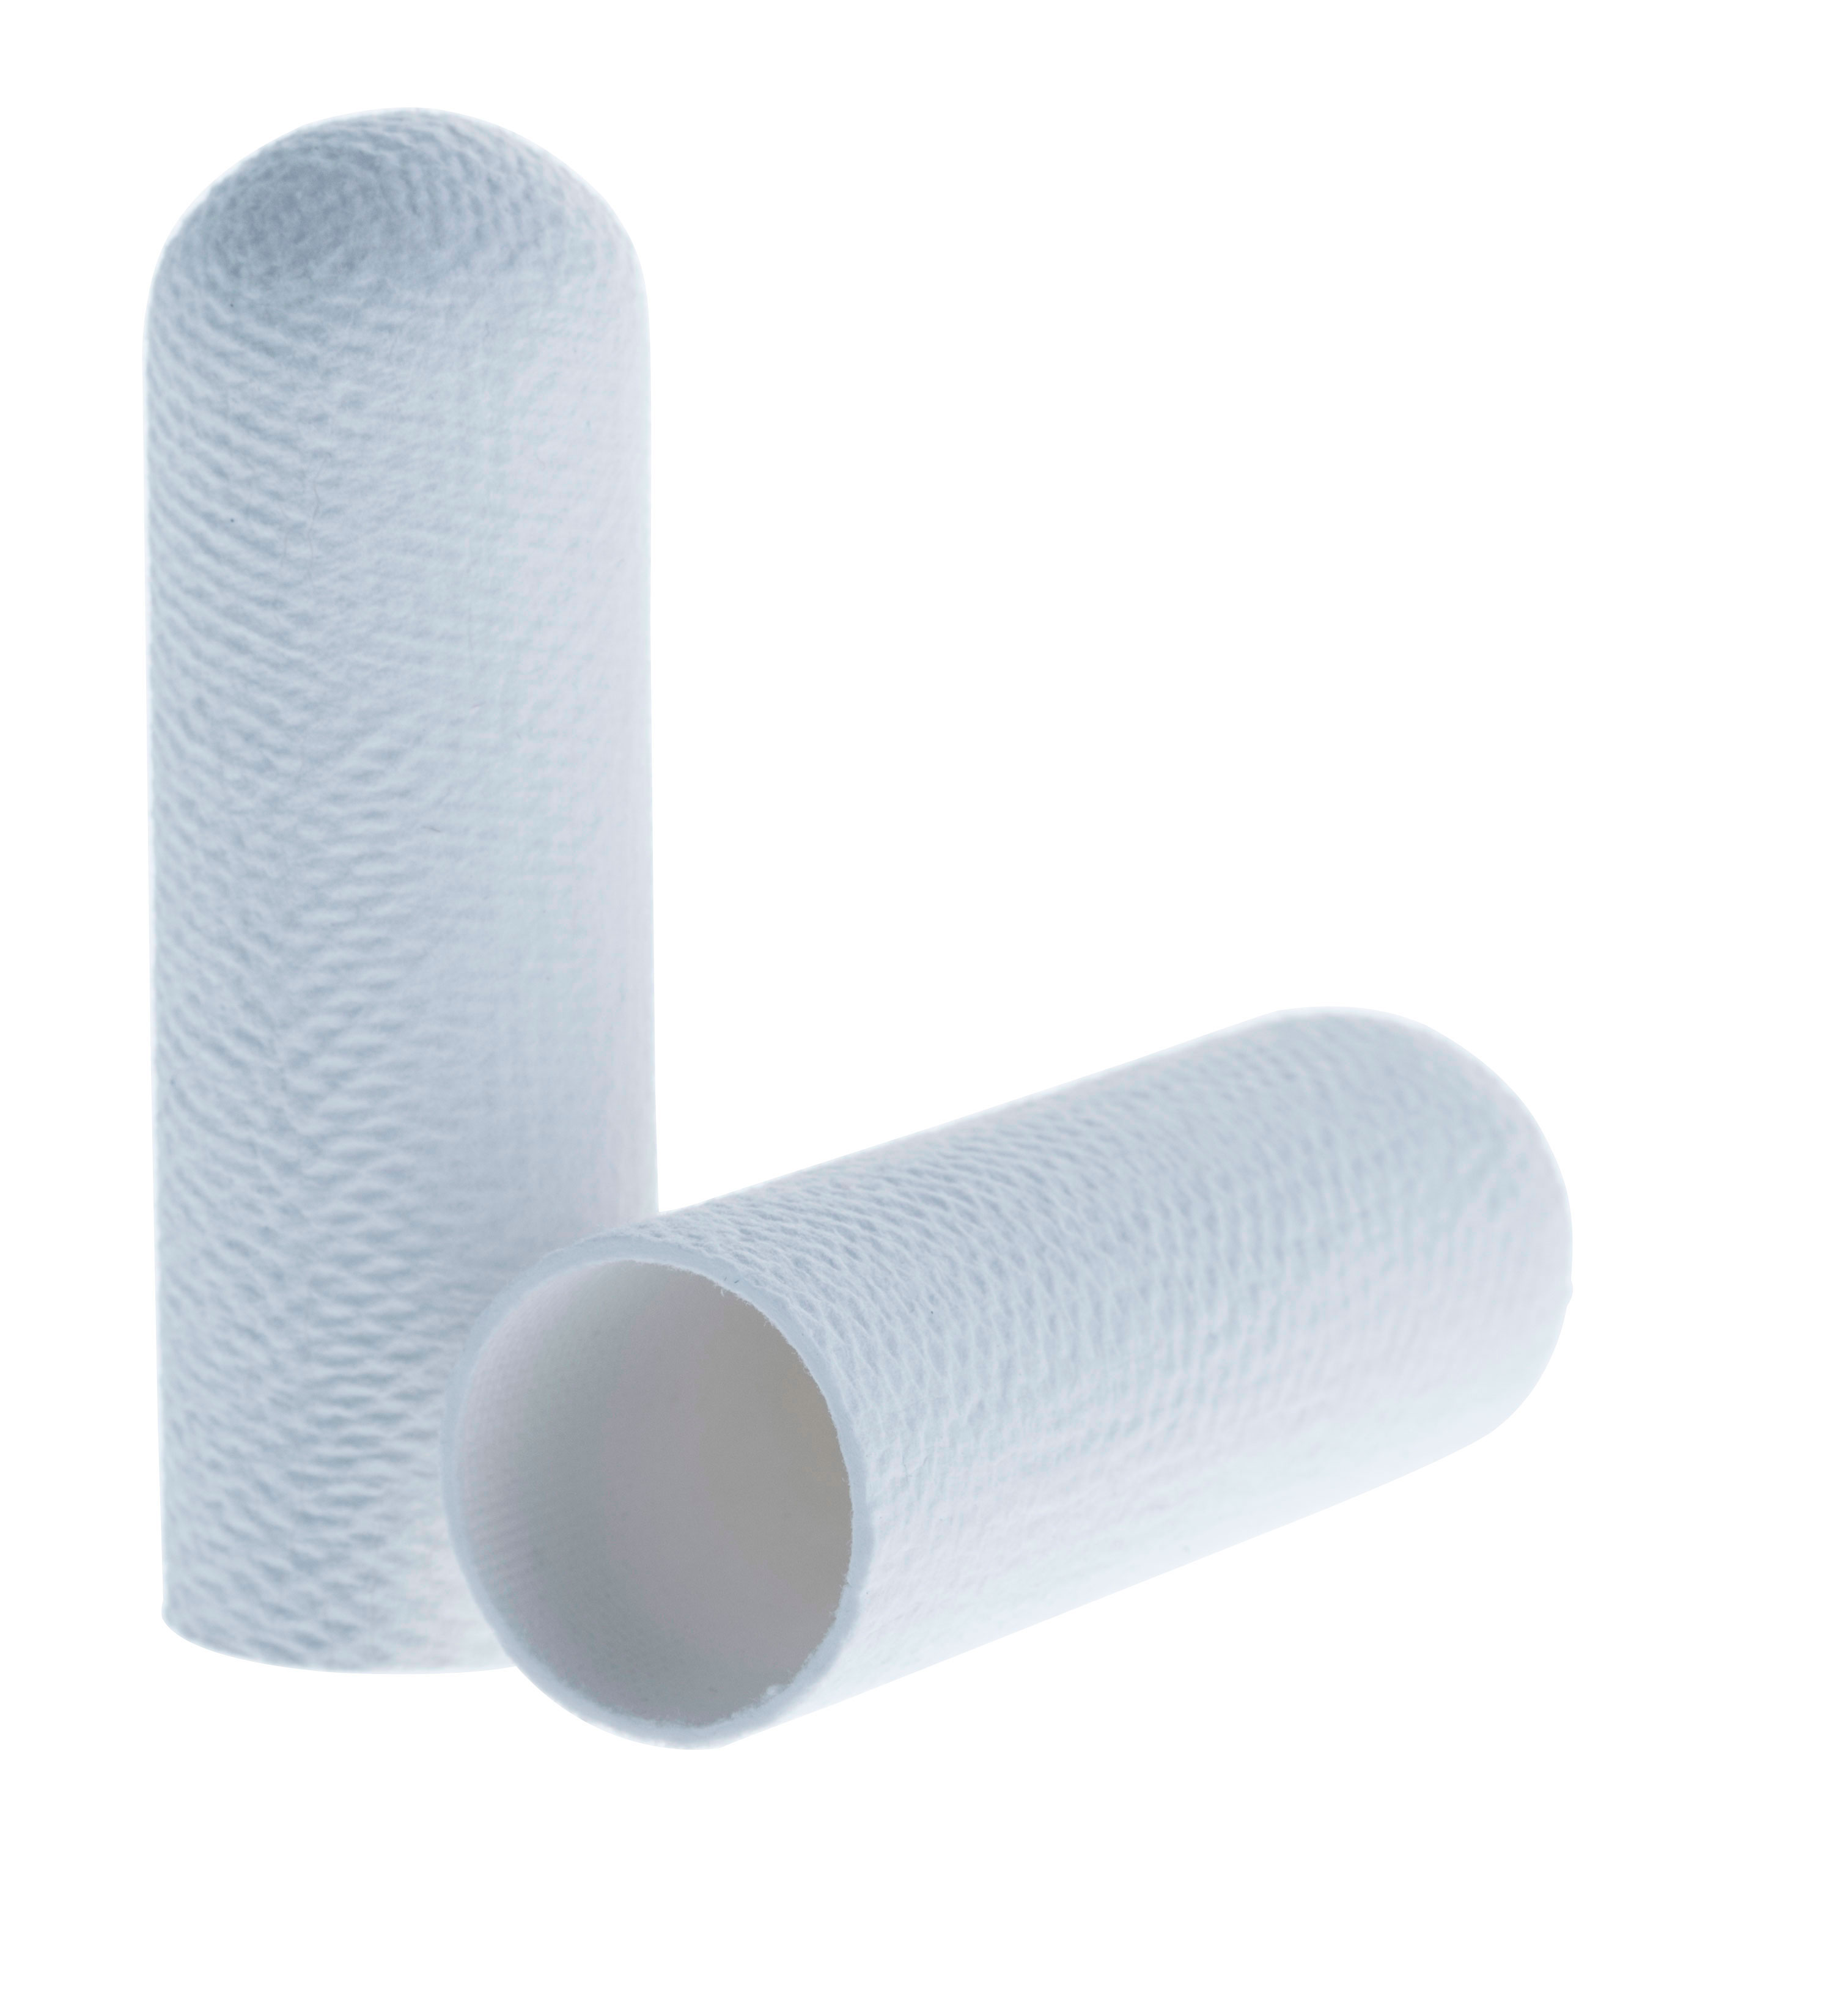 Cellulose extraction thimbles for Soxhlet extraction. SCHARLAU. Standard cellulose cartridge. Dim. Øxlength: 33x118mm. Particle retention in liquid: Nom. 8-15 microns